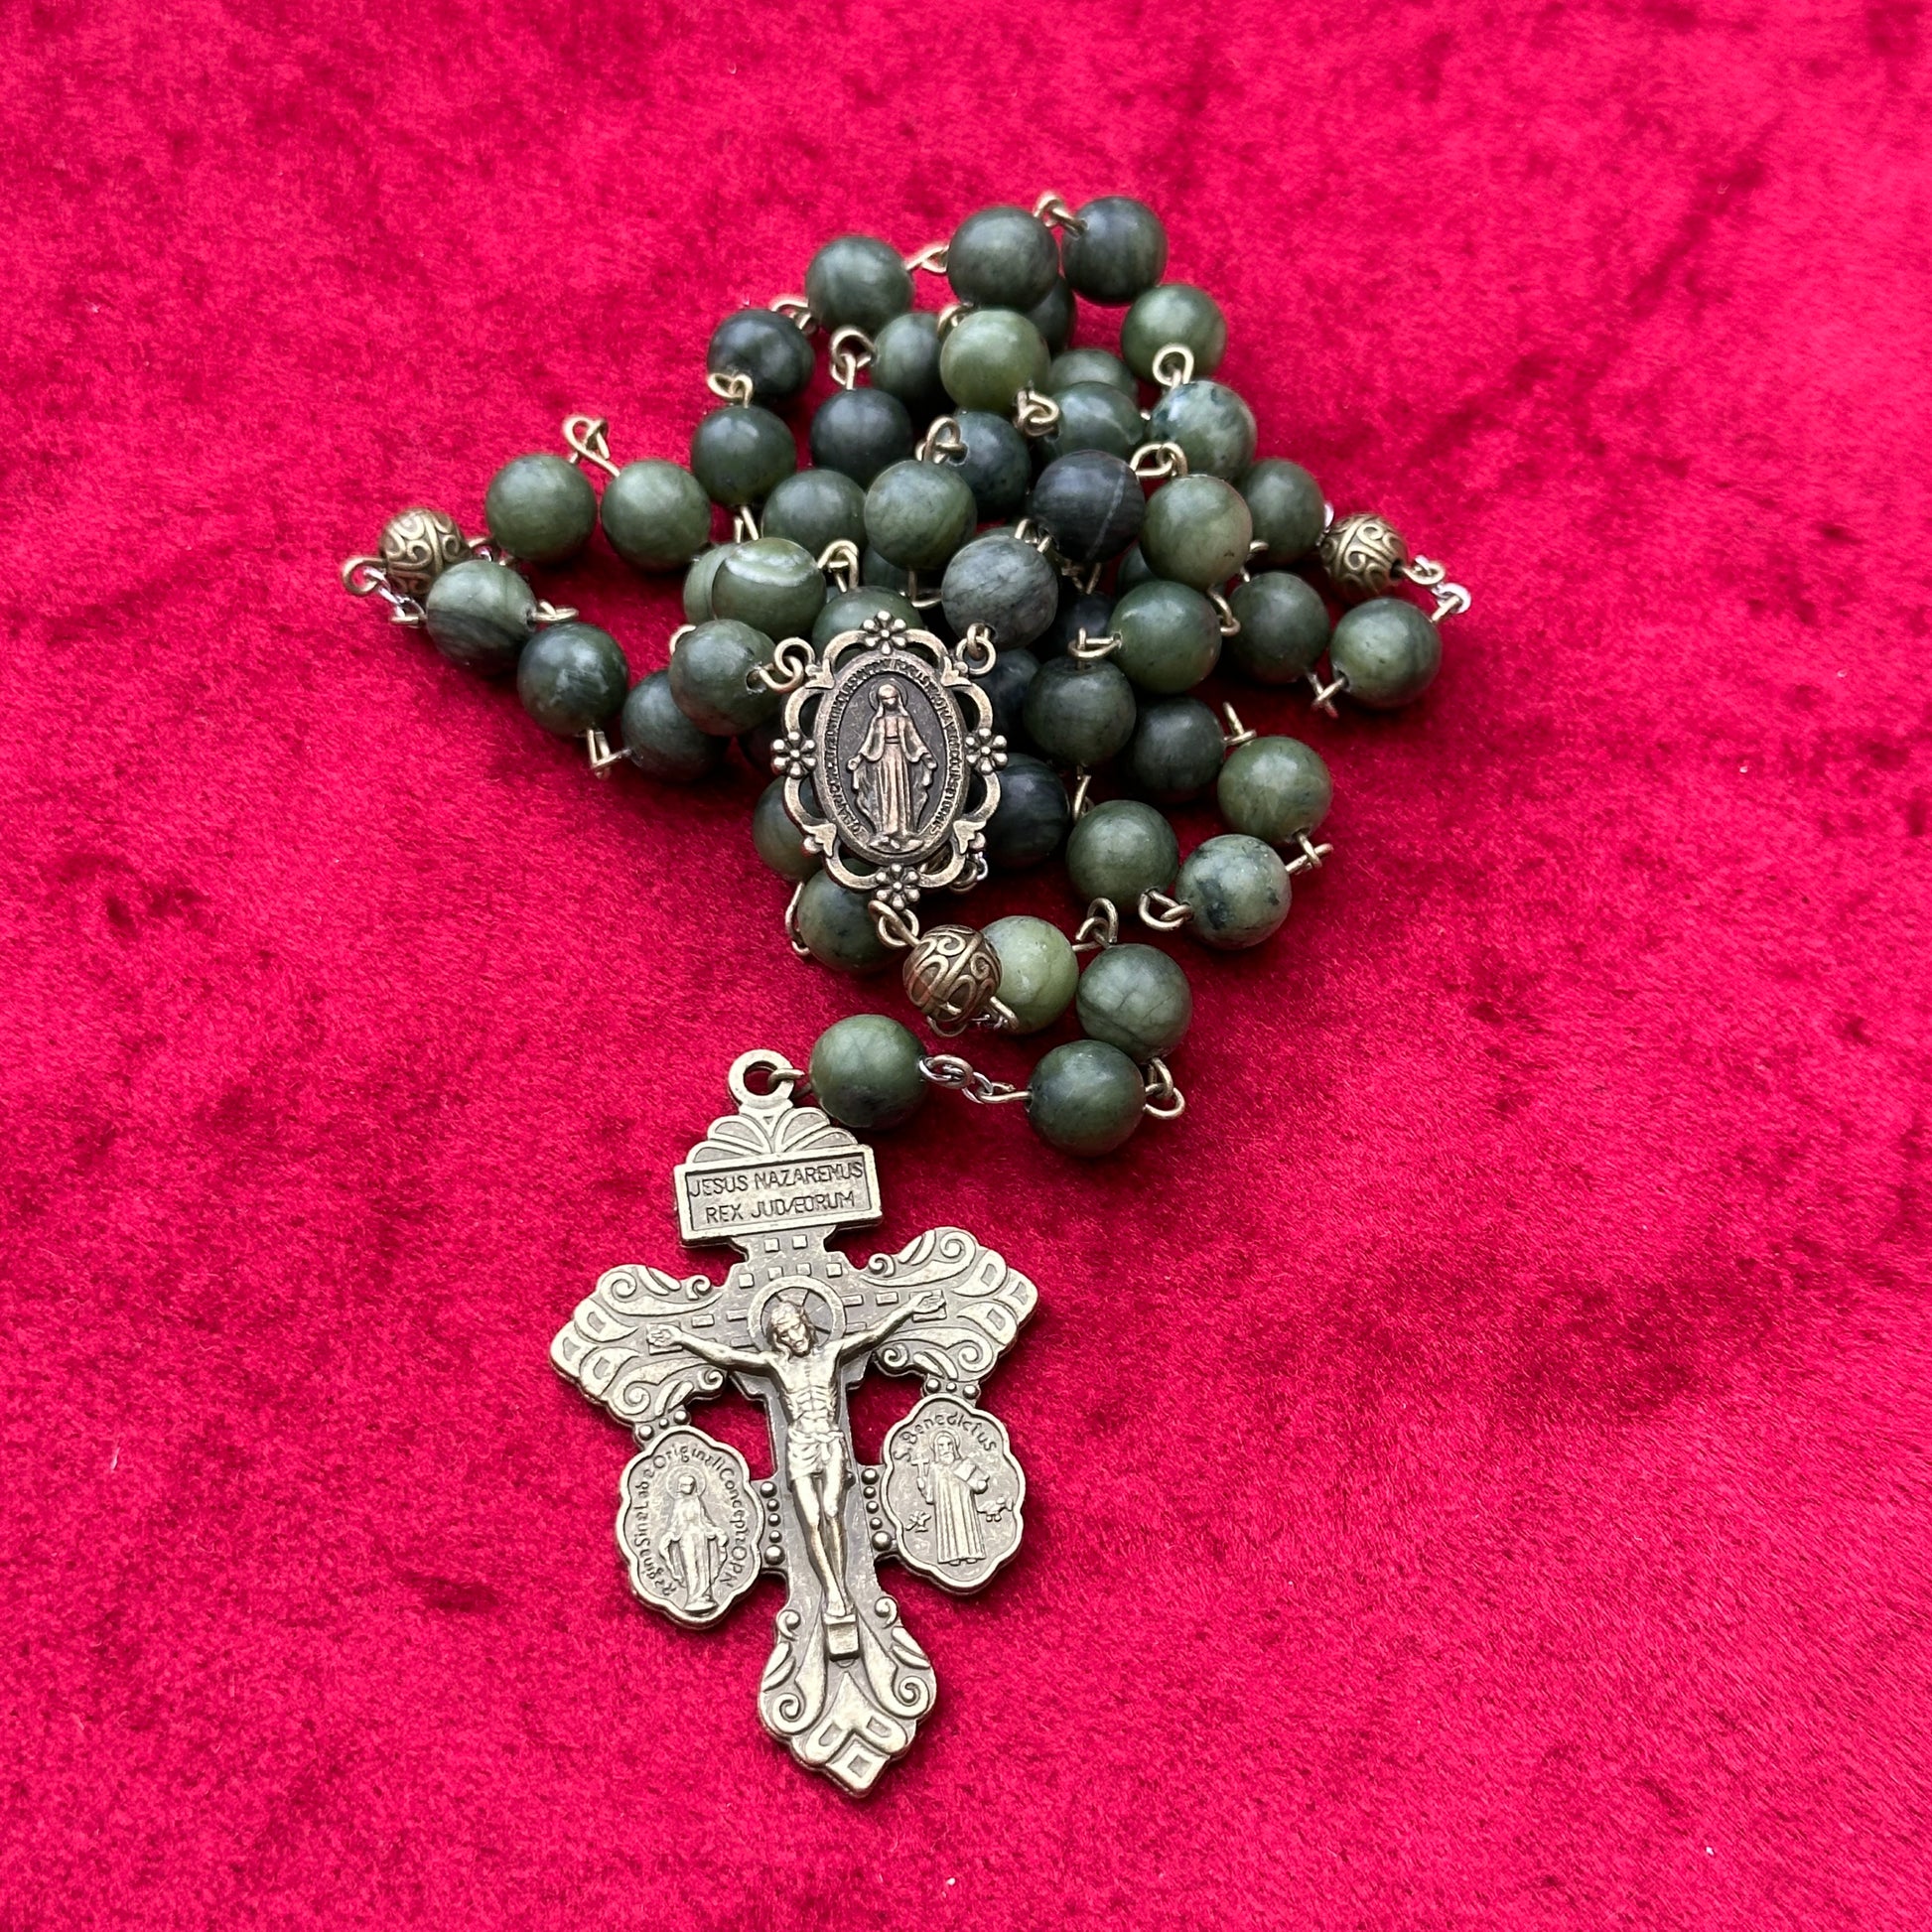 Catholic traditional rosary beads sale online